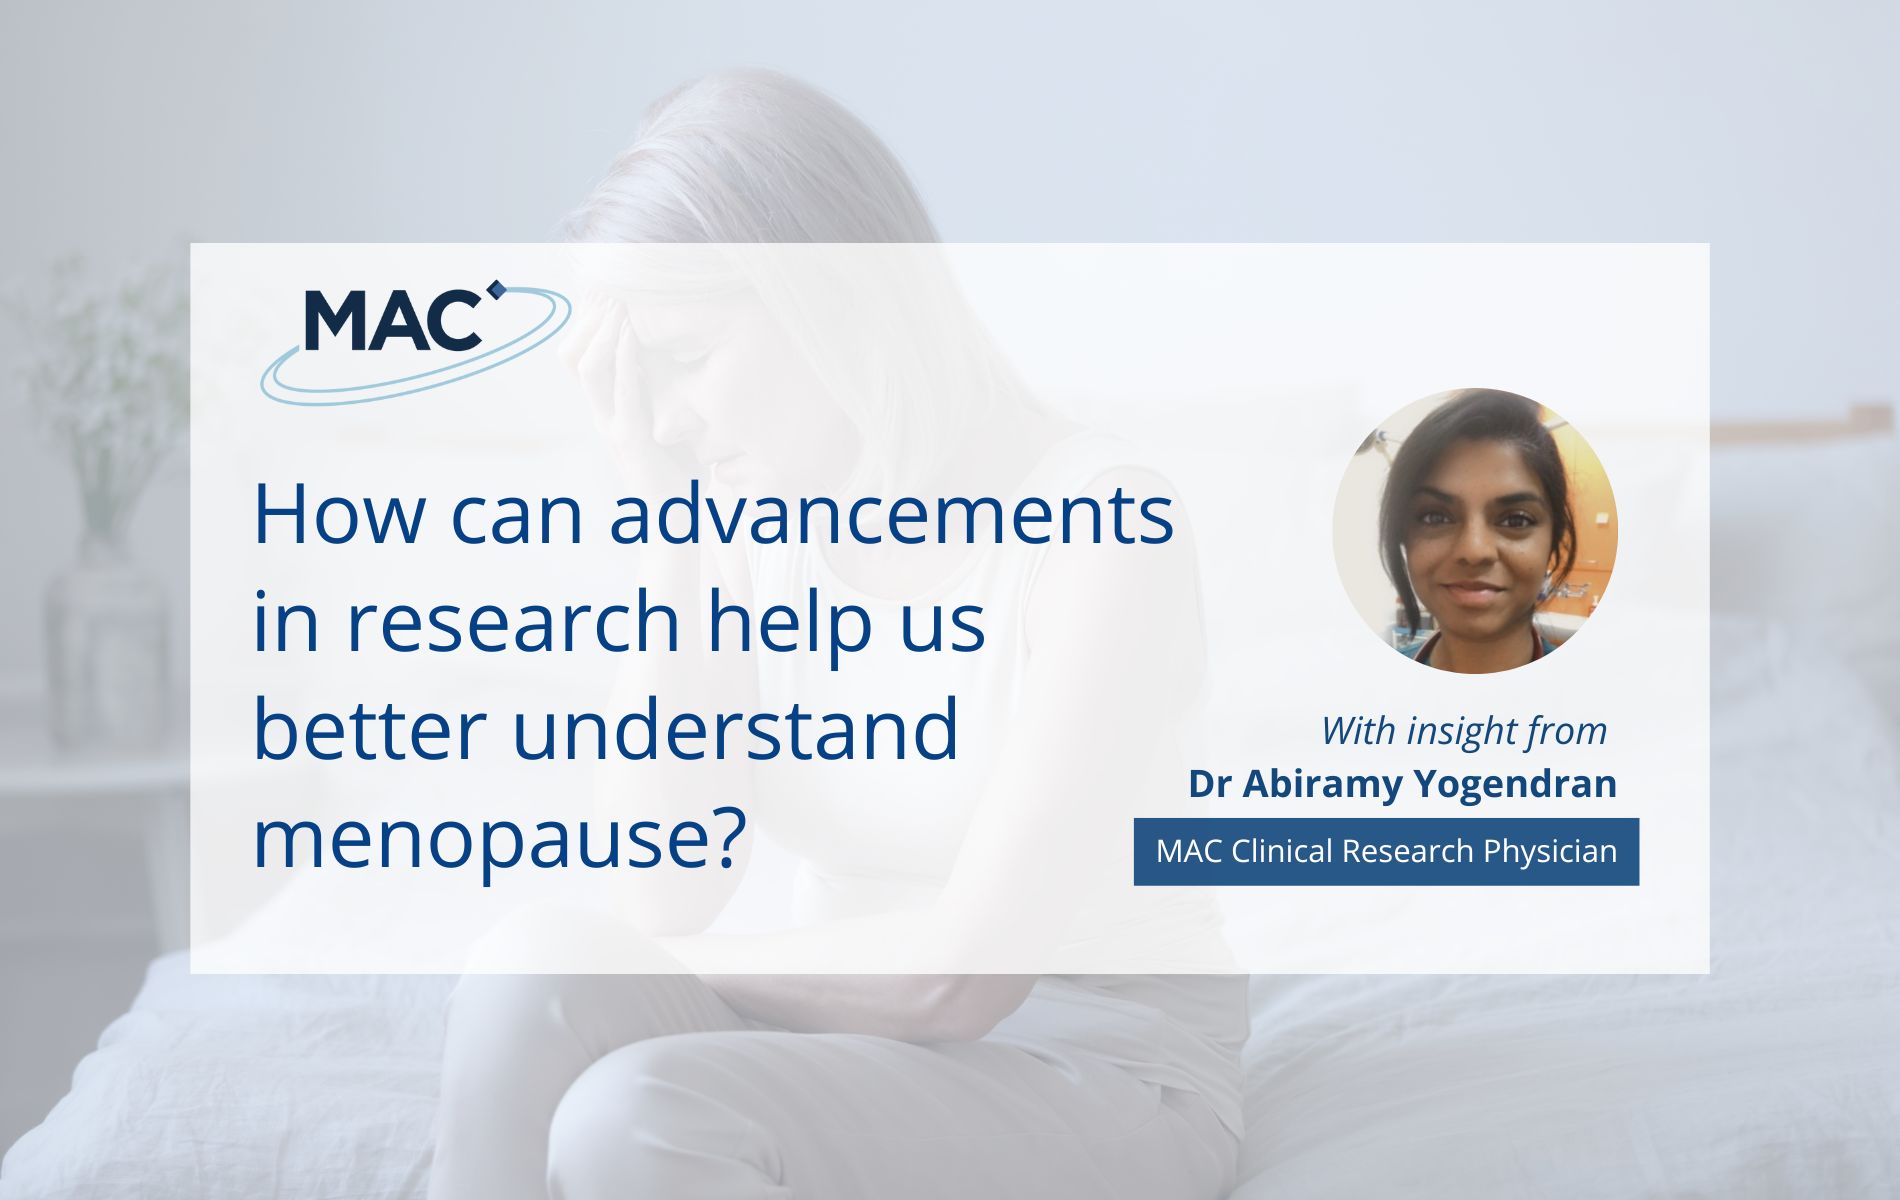 How can advancements in research help us better understand menopause and provide personalised treatments for managing symptoms?